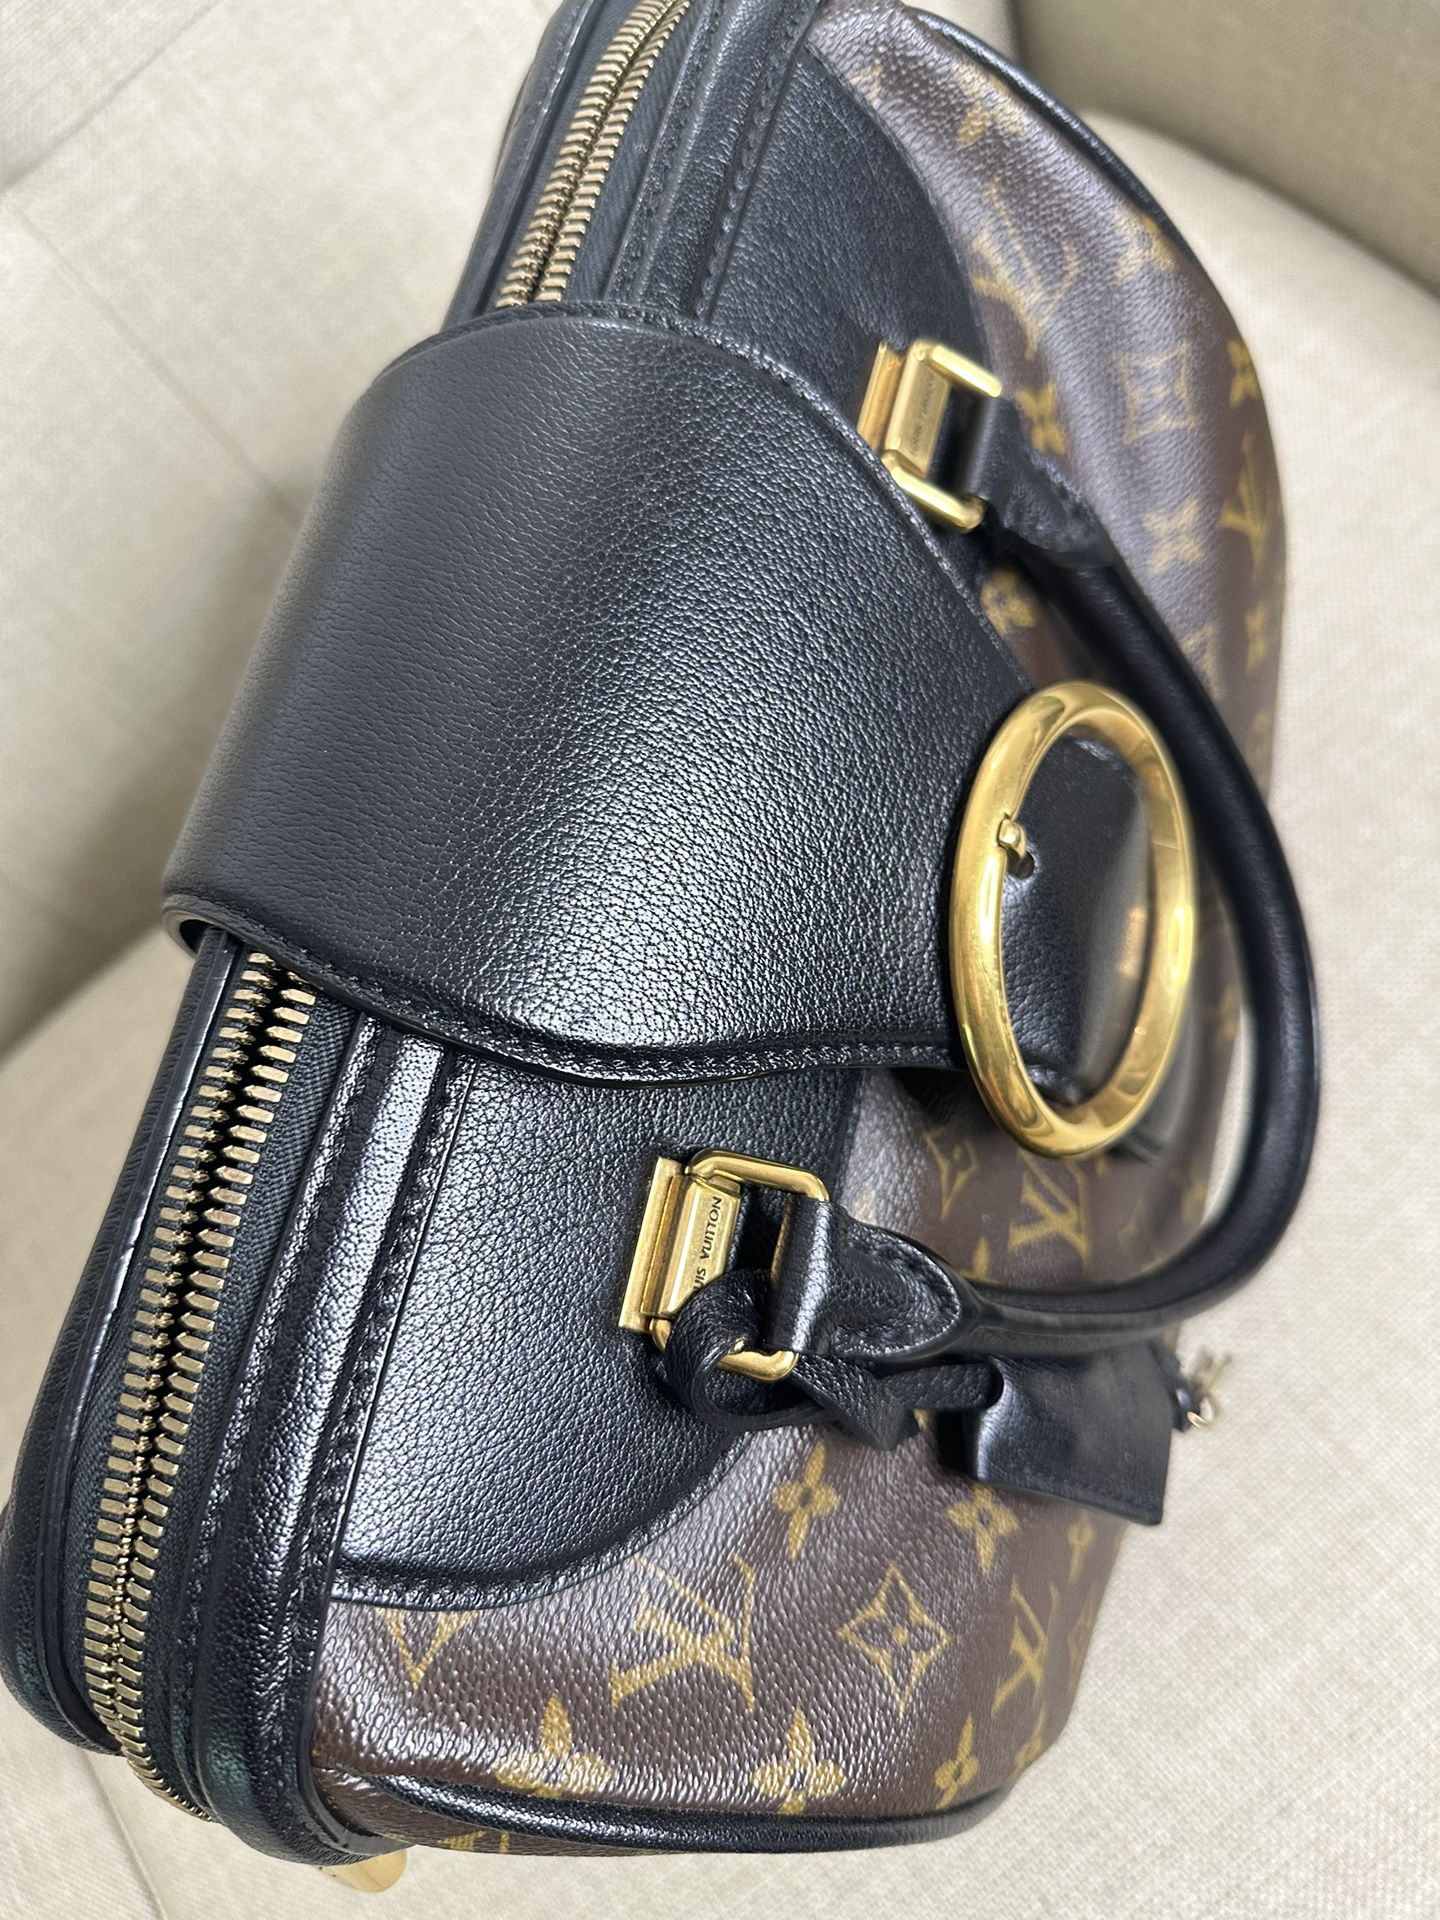 Louis Vuitton Speedy Limited Edition for Sale in No Huntingdon, PA